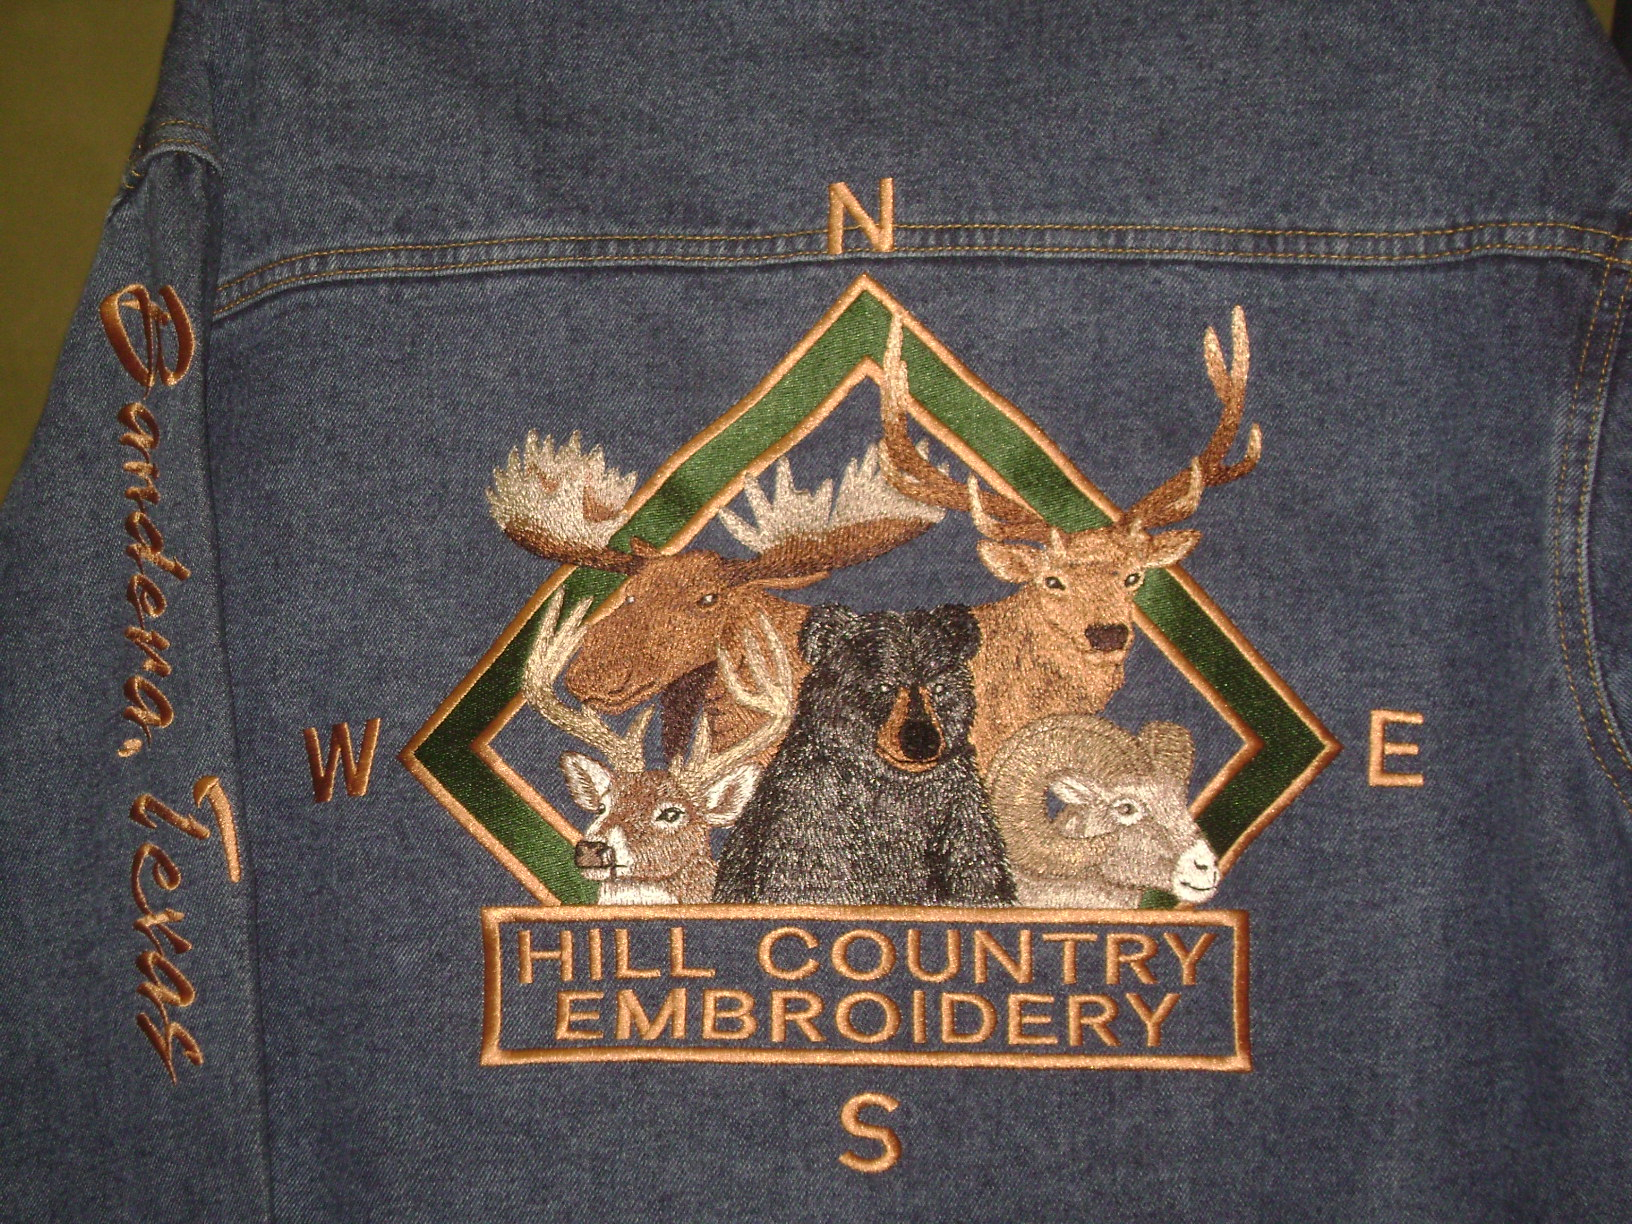 Custom Embroidery Patterns Hill Country Embroidery Bandera Texas Custom Embroidery